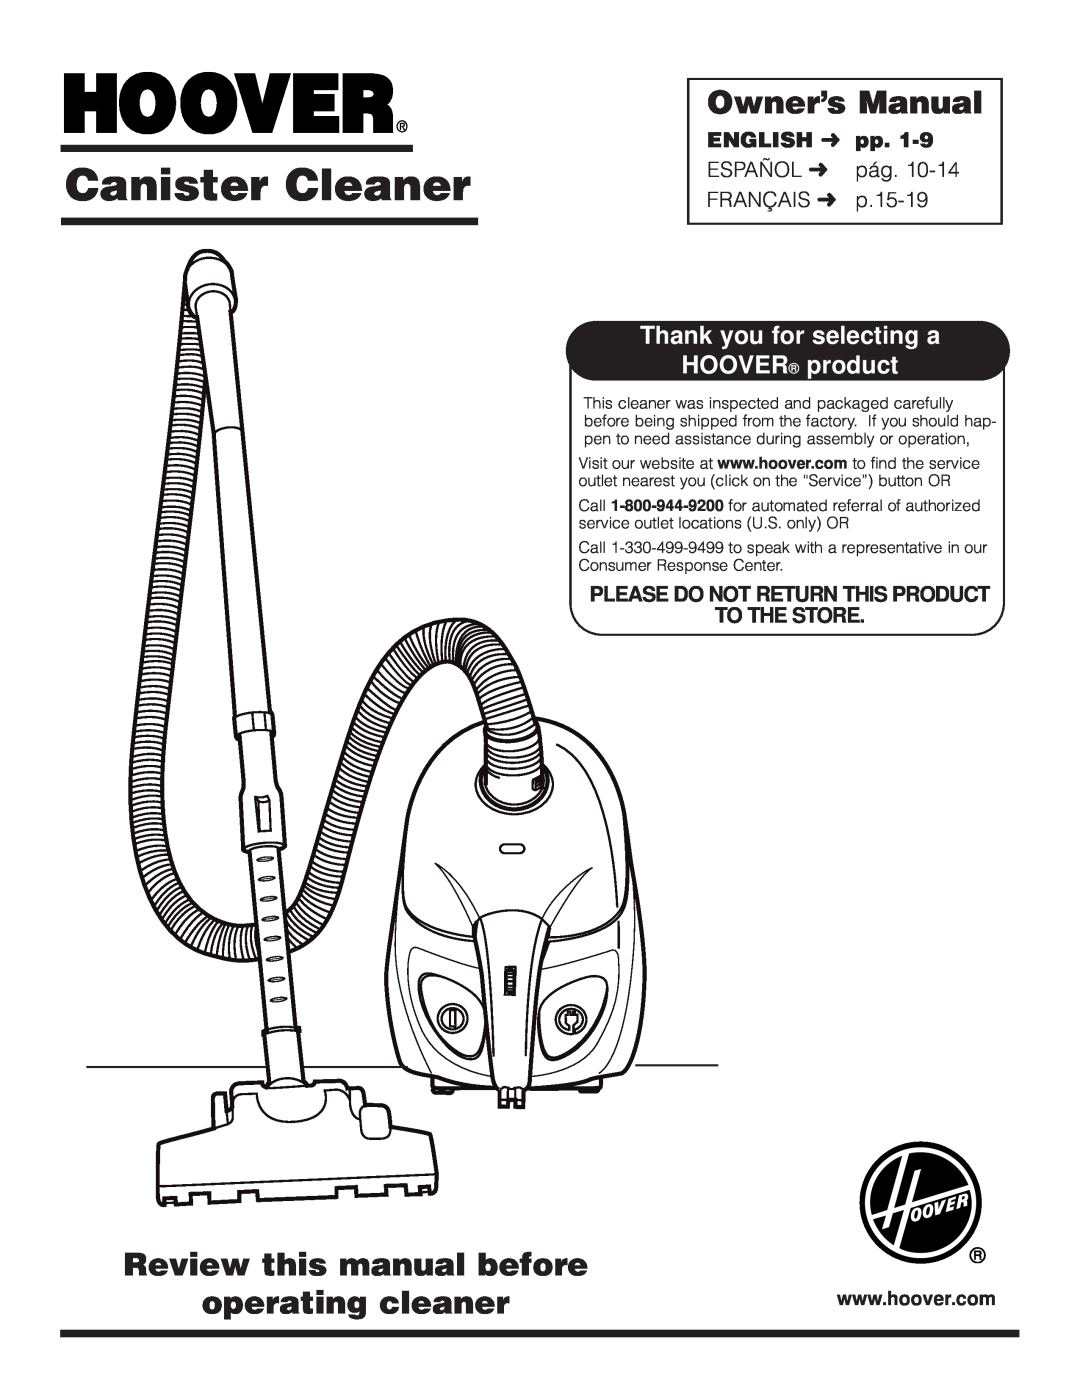 Hoover S1349 owner manual Owner’s Manual, Review this manual before operating cleaner, ENGLISH pp, Canister Cleaner 